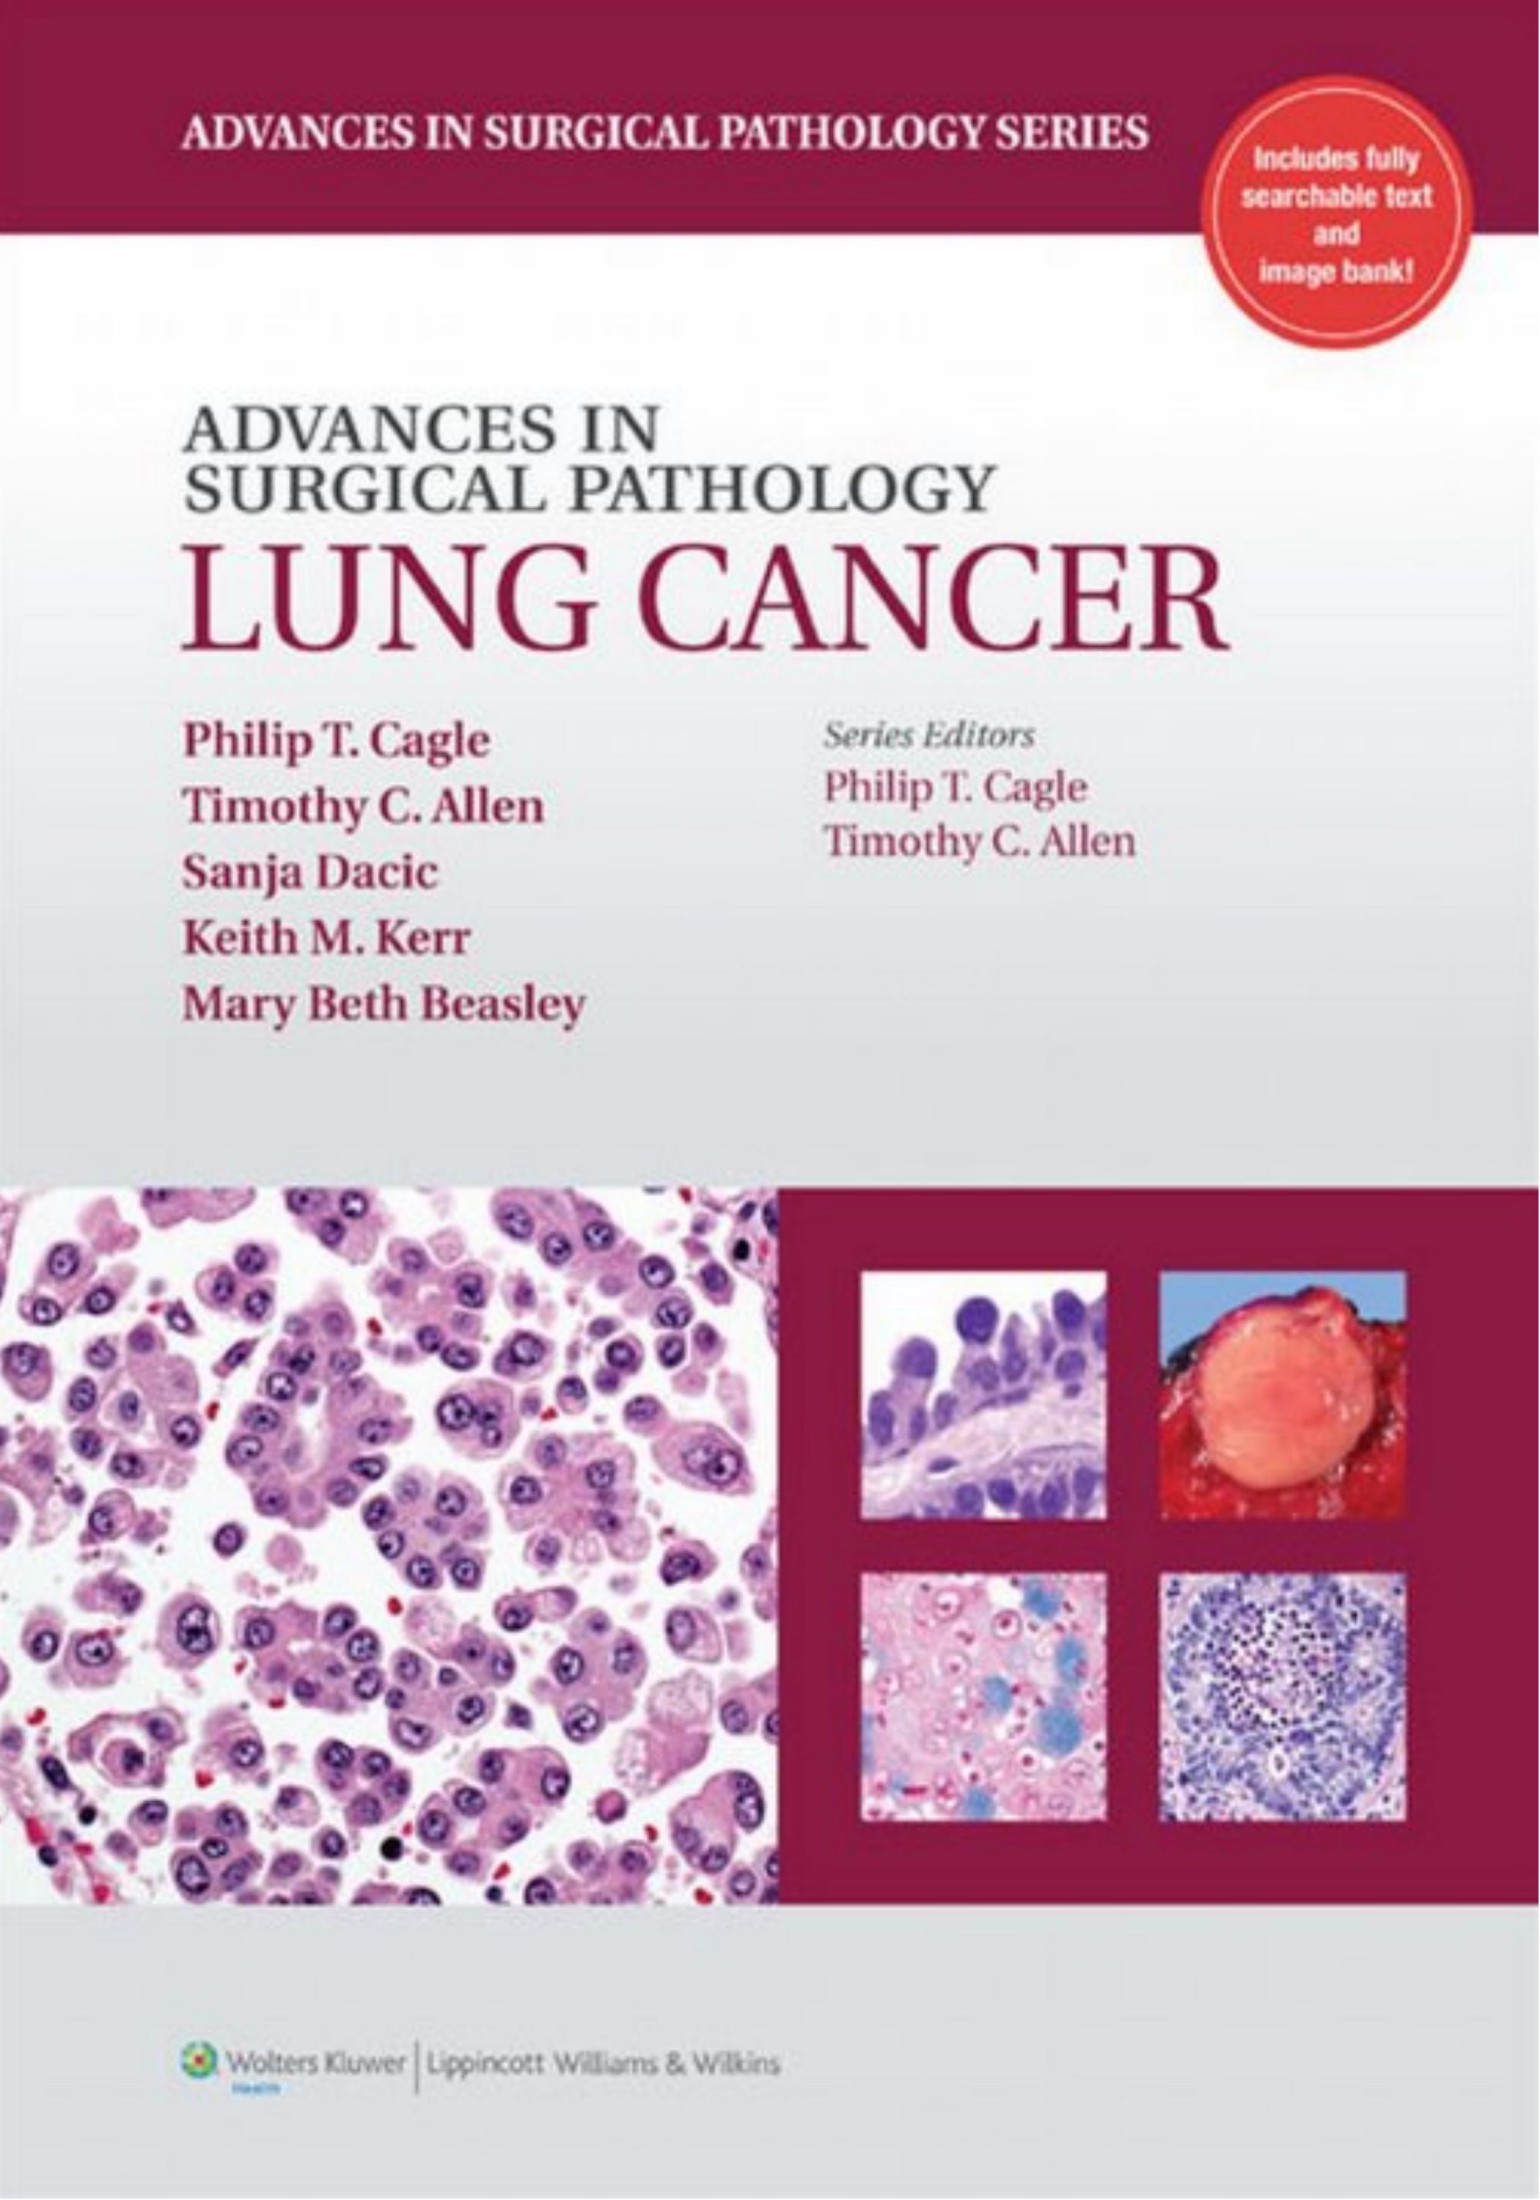 Advances in Surgical Pathology Lung Cancer 1st Edition by Philip T. Cagle , Philip T. Cagle MD , Timothy Allen MD JD 